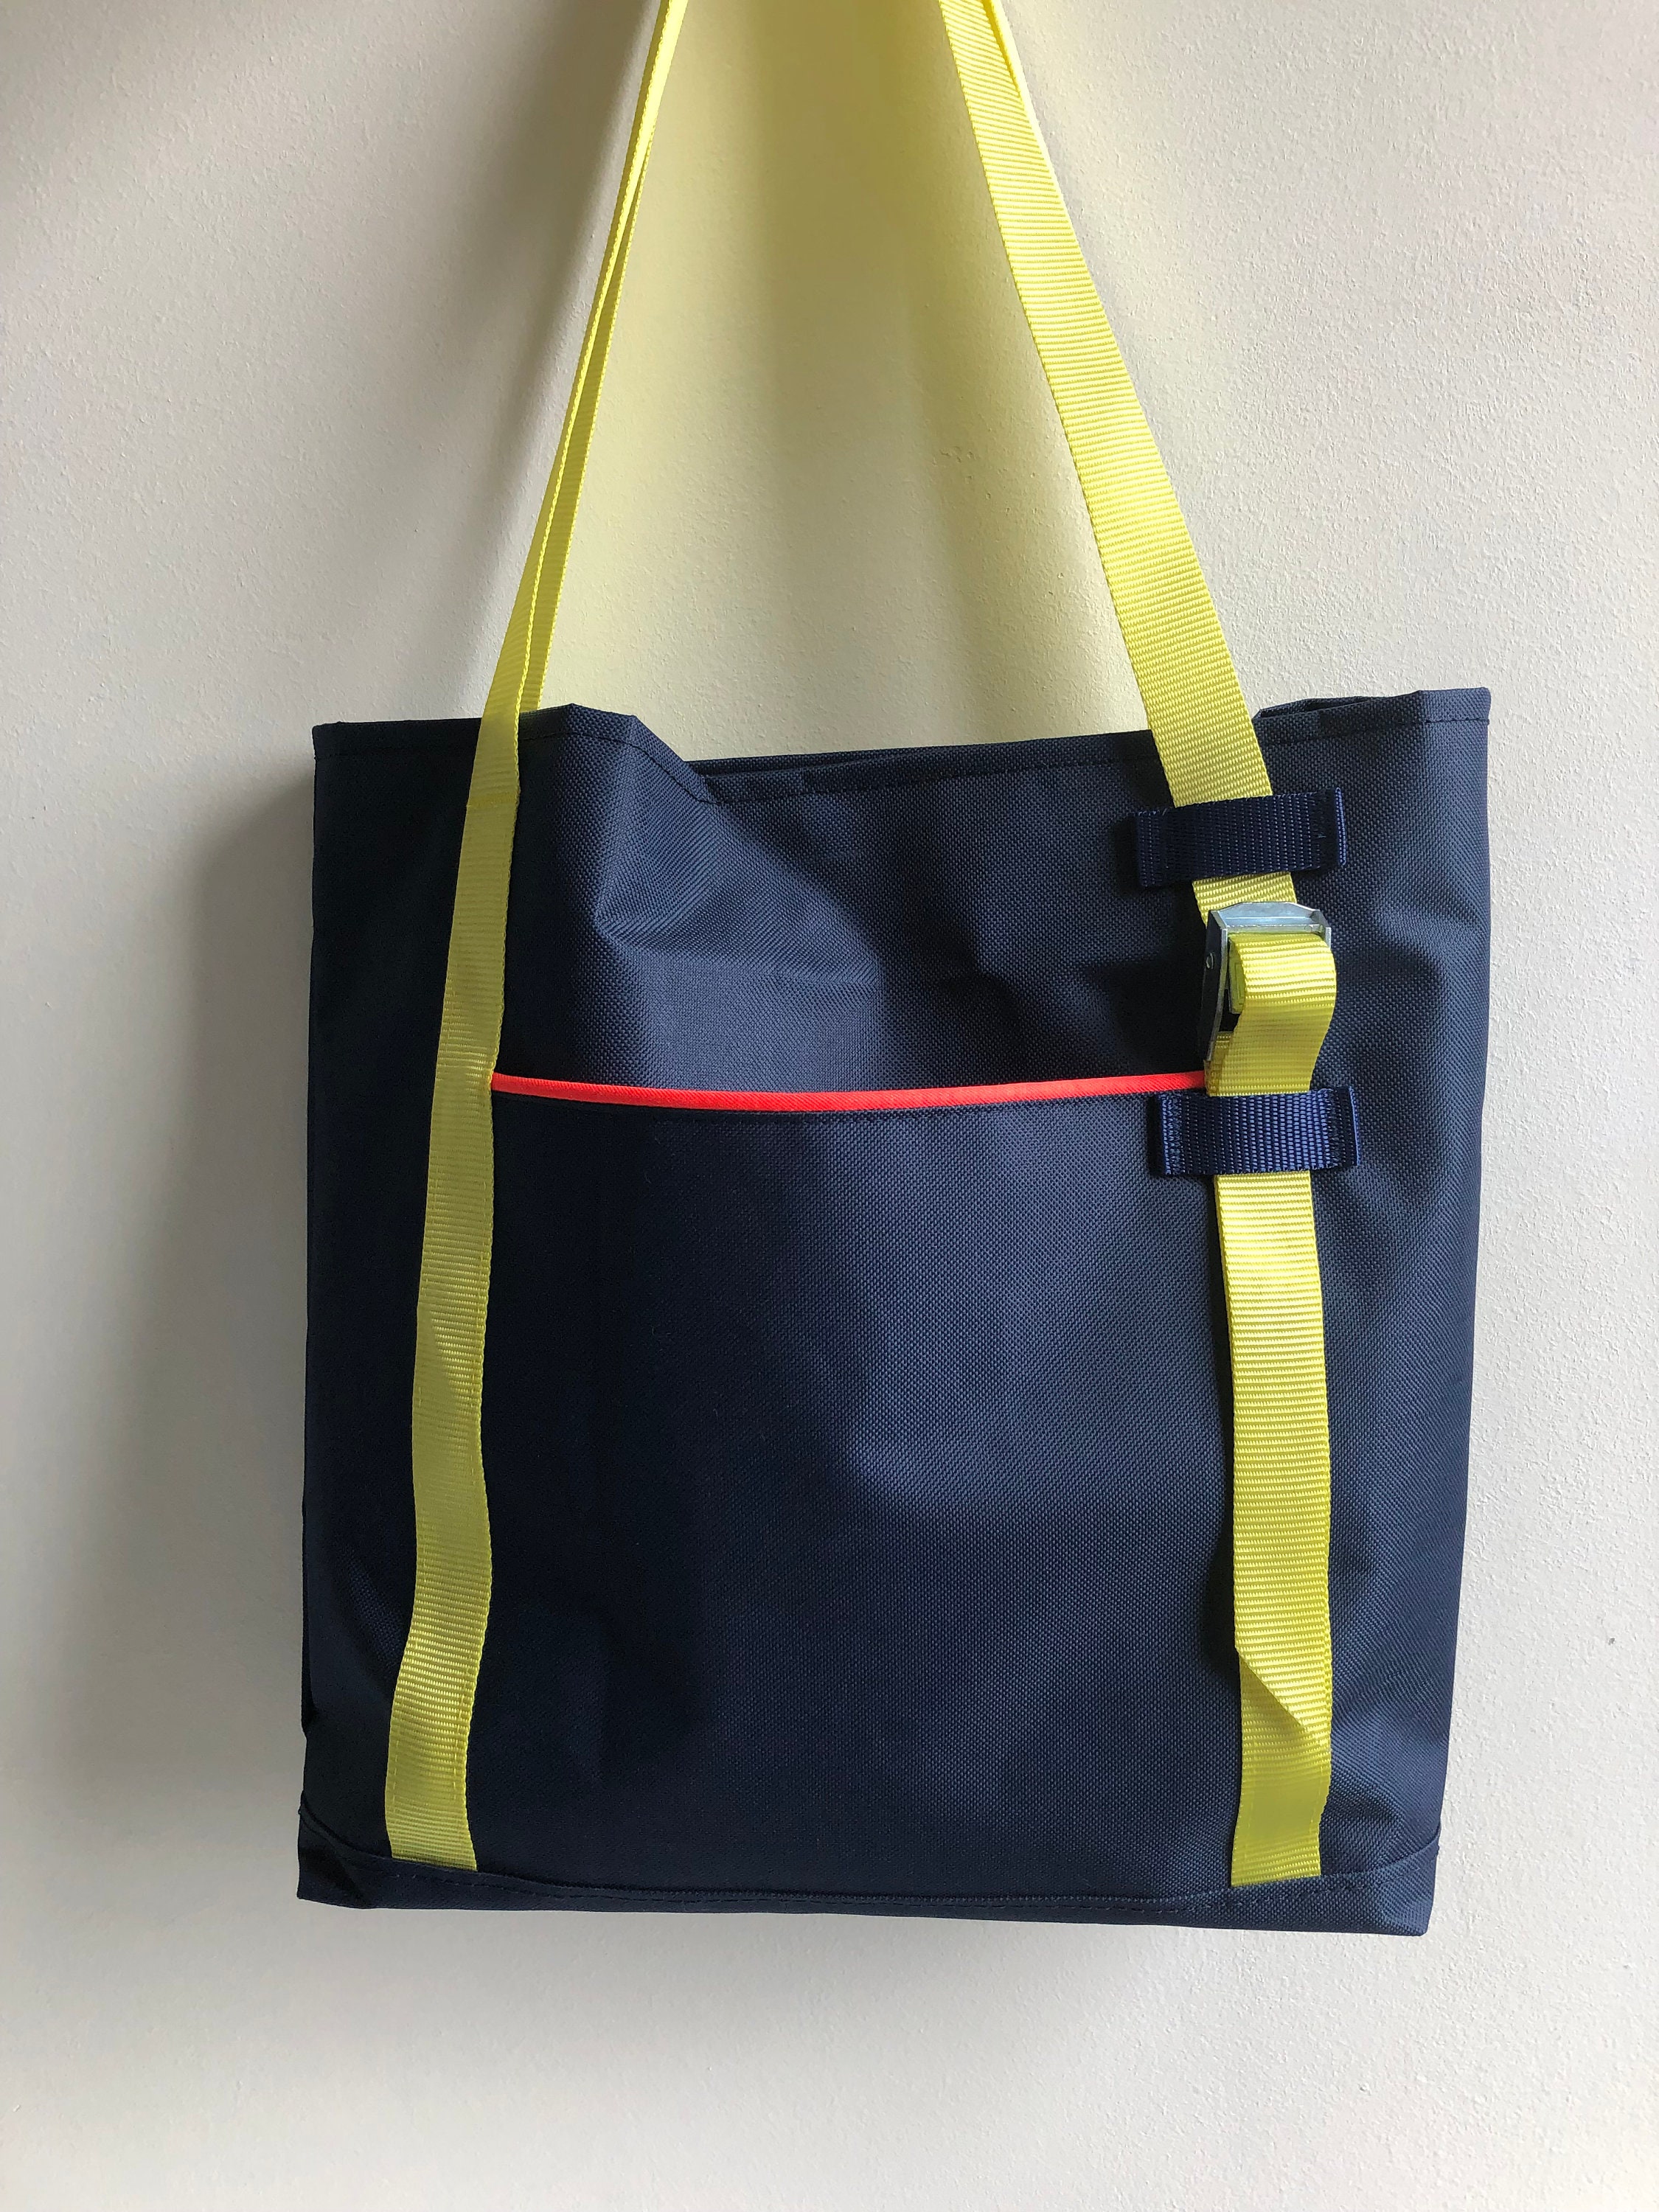 Courtauld Tote Bag Yellow Blue